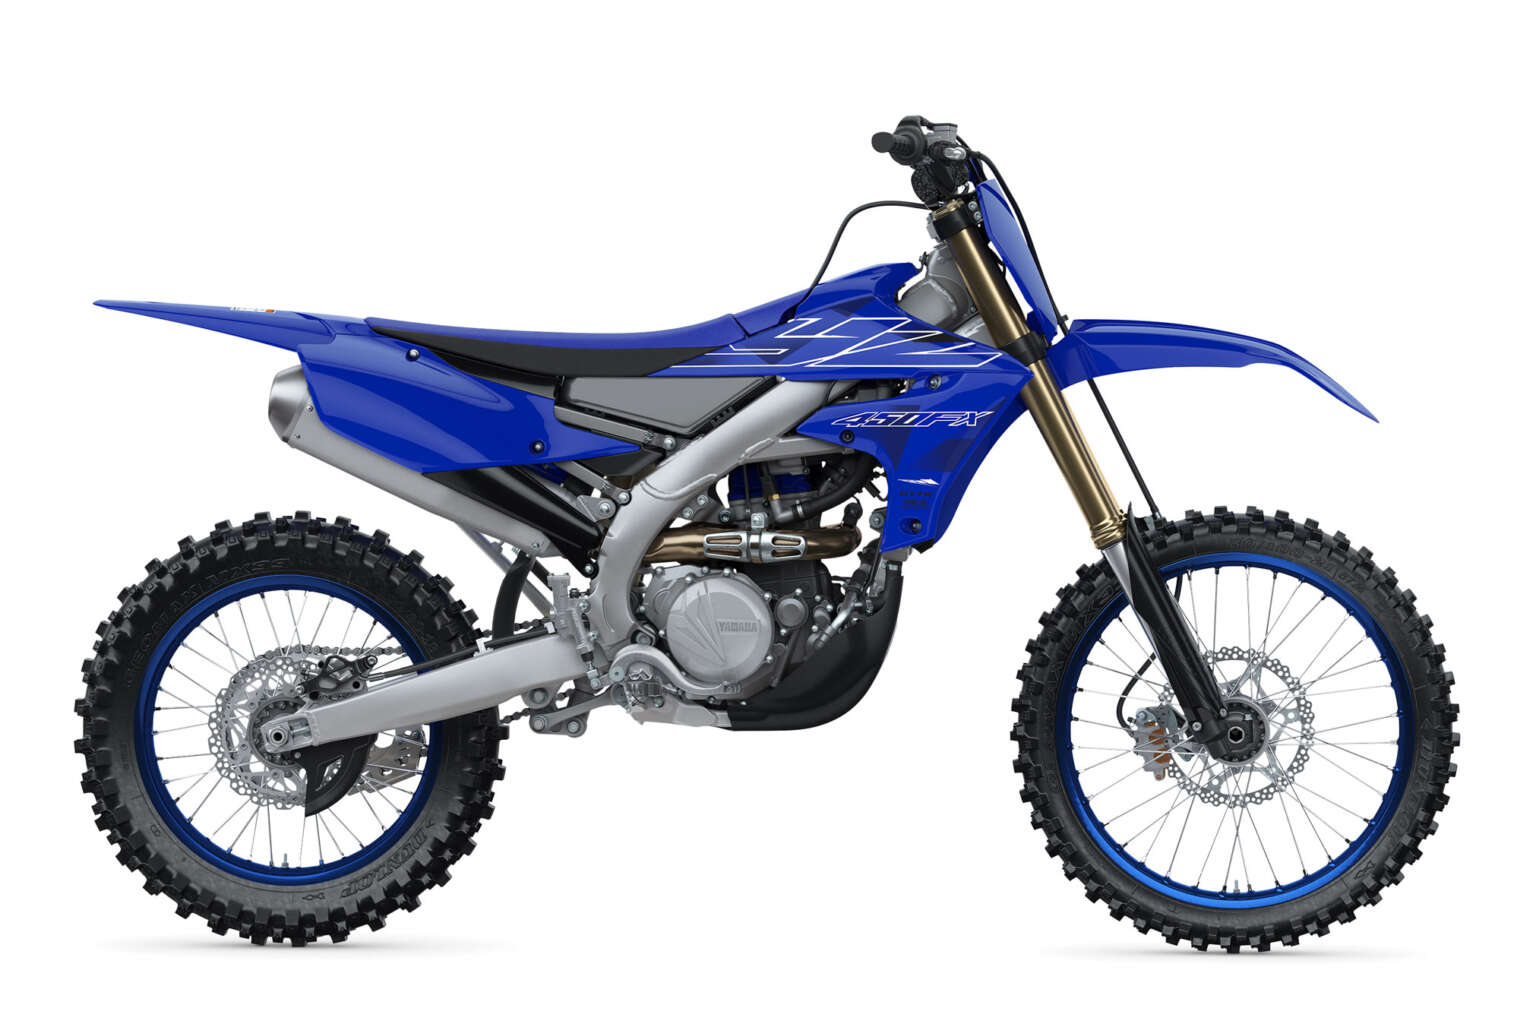 2022 Yamaha YZ450FX Guide • Total Motorcycle